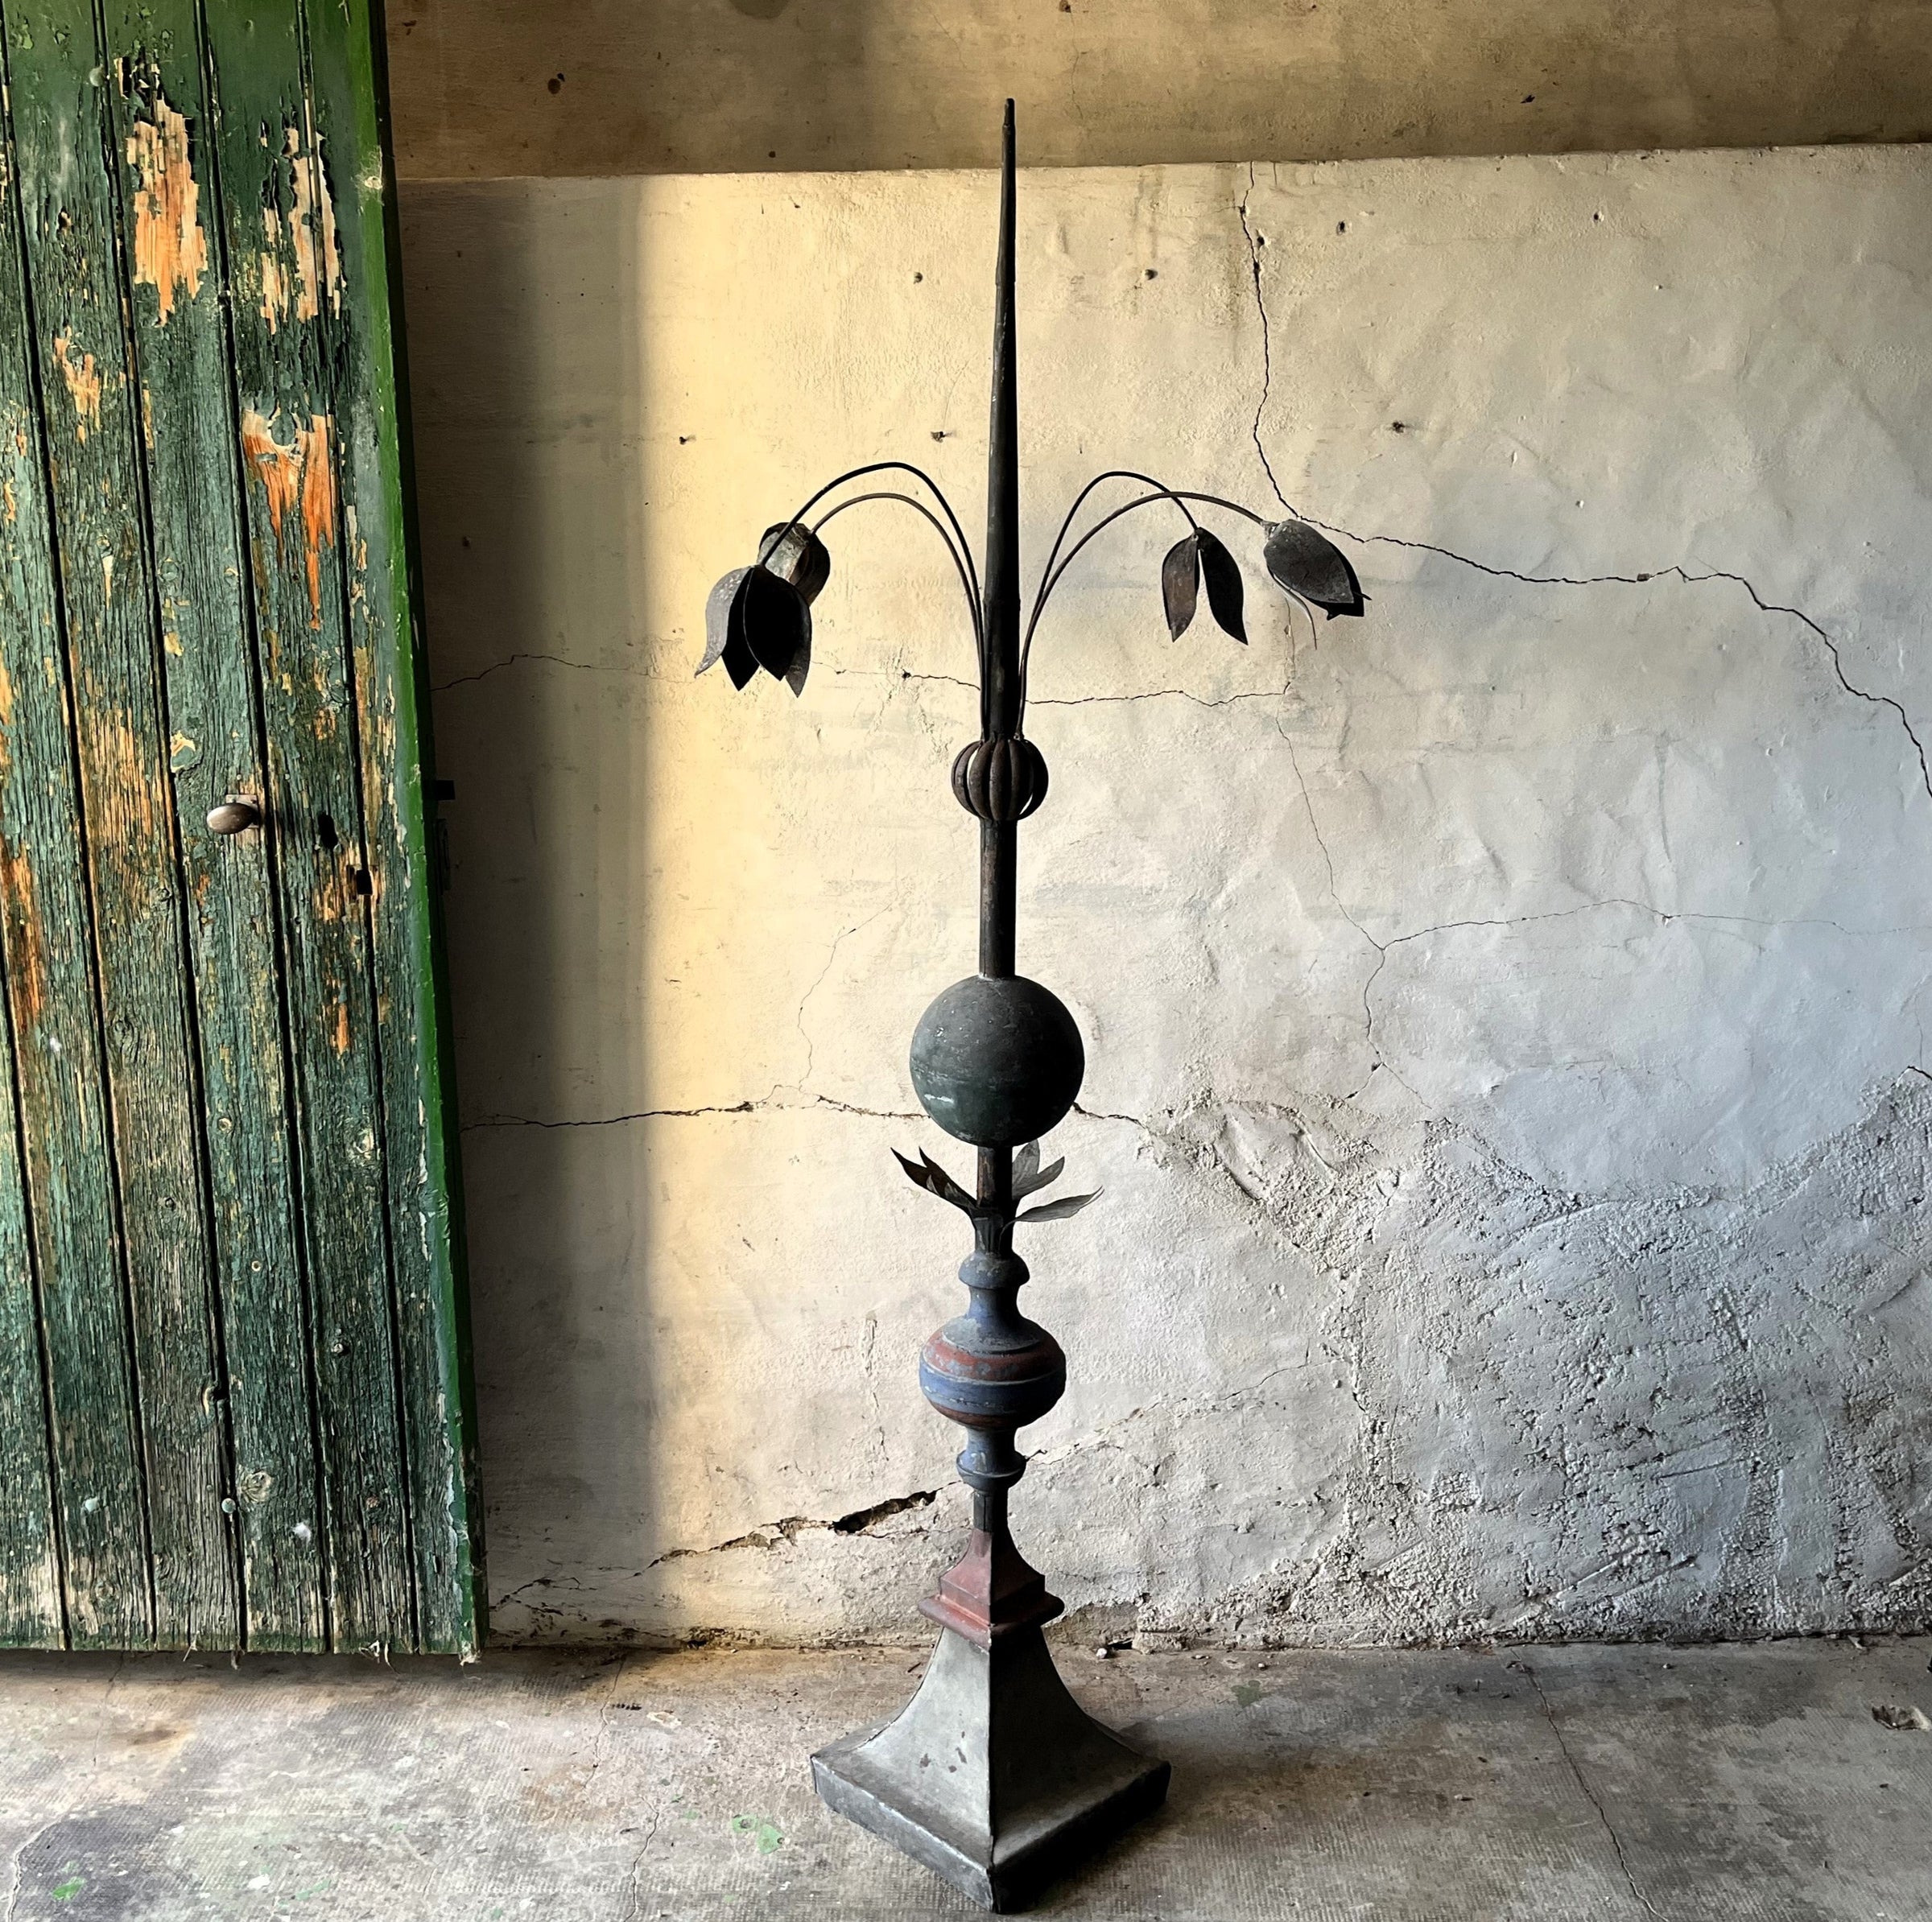 Beautiful, tall 19th century French decorative, polychromed zinc and iron roof finial